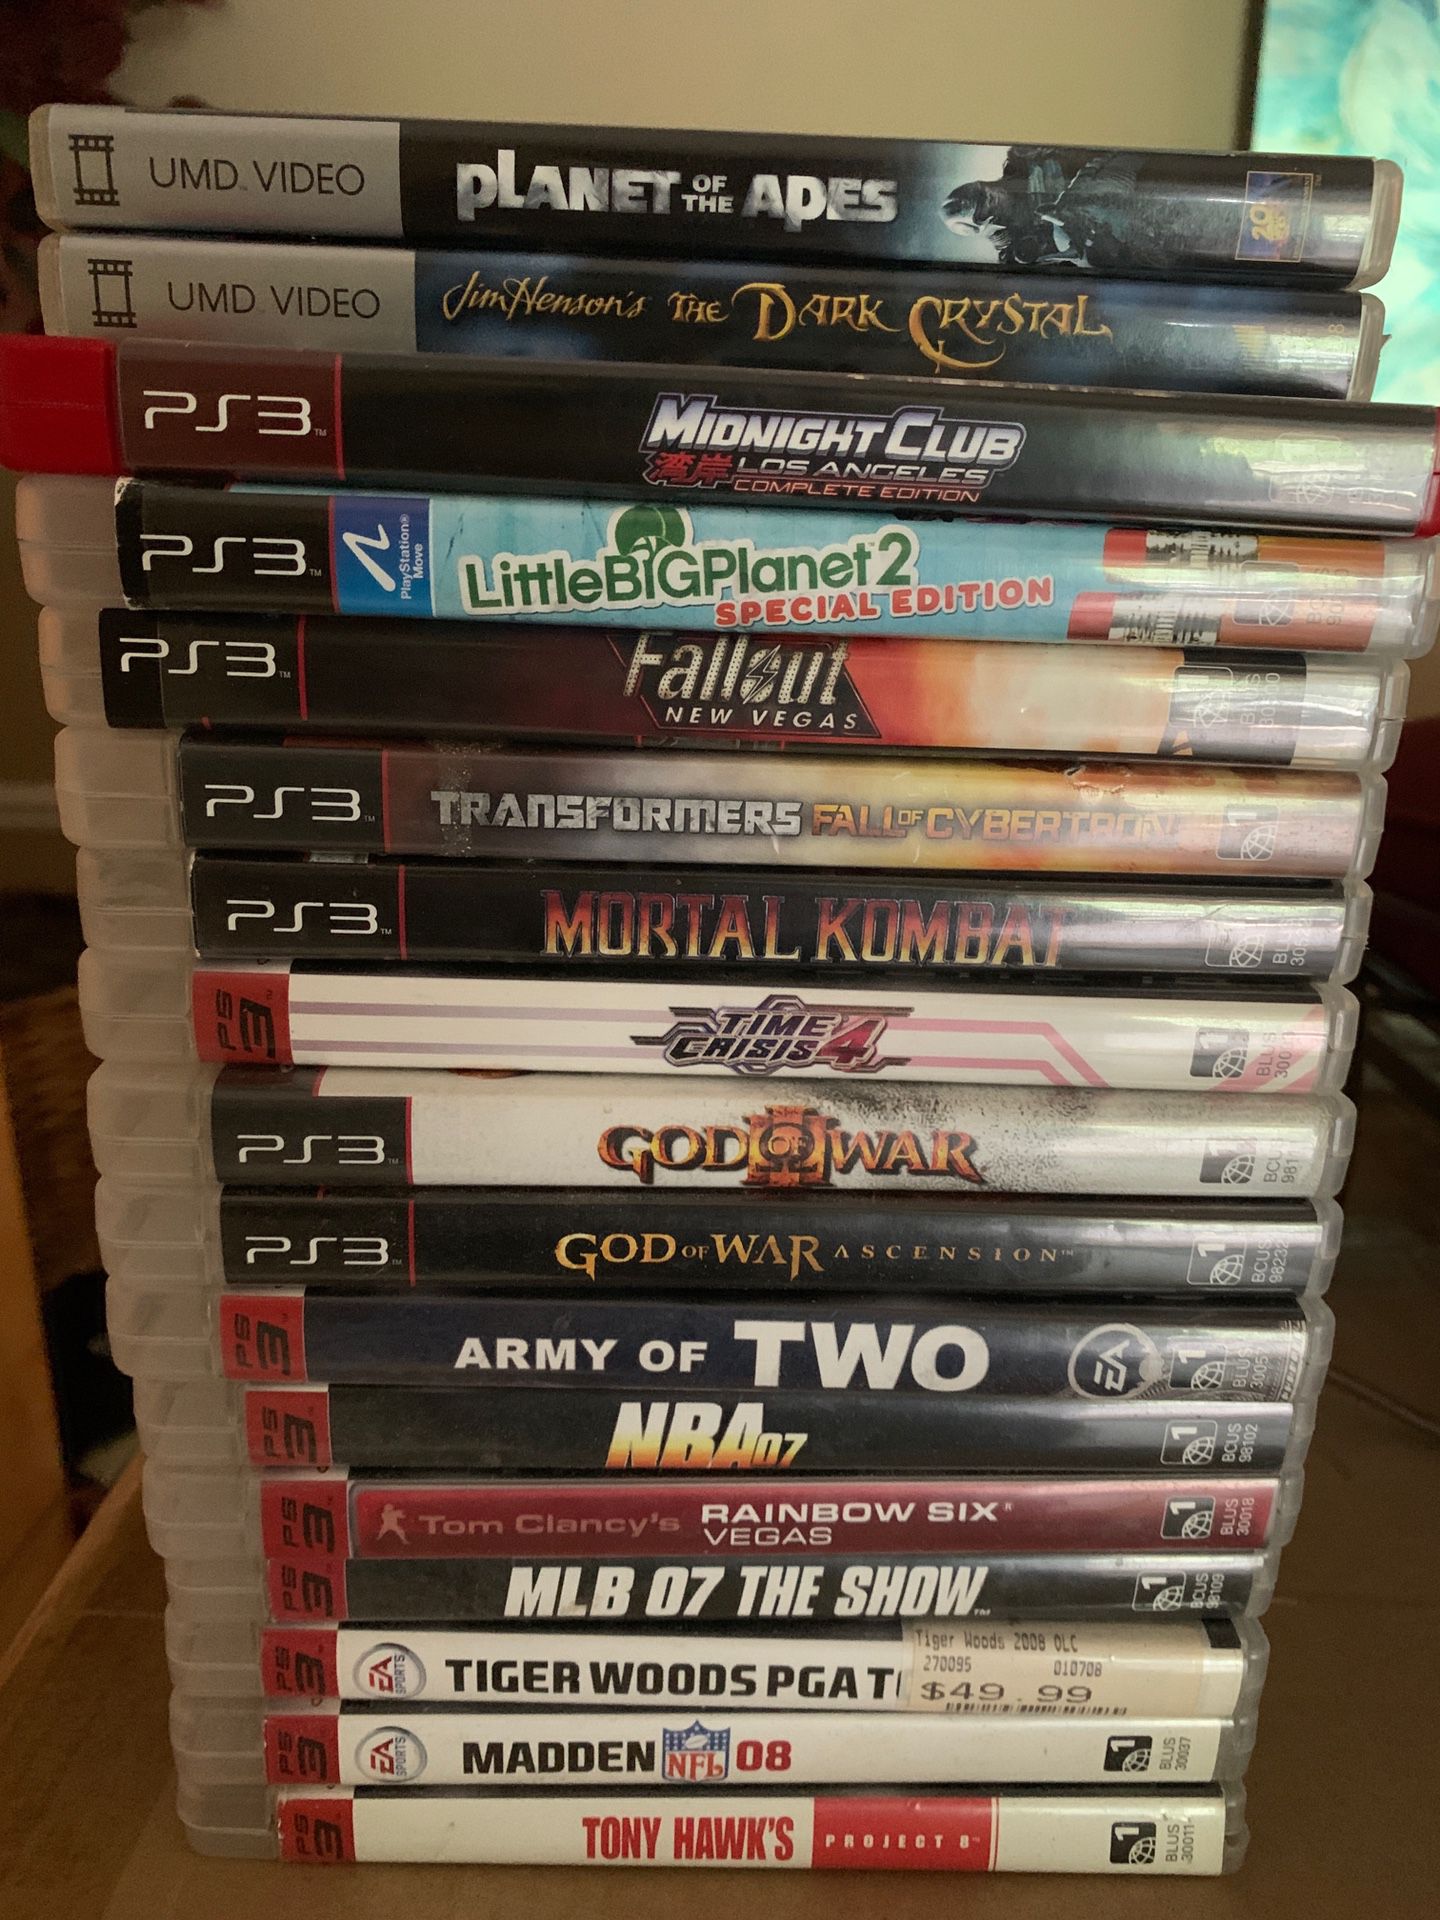 PS3 Games and 2 PSP Movies